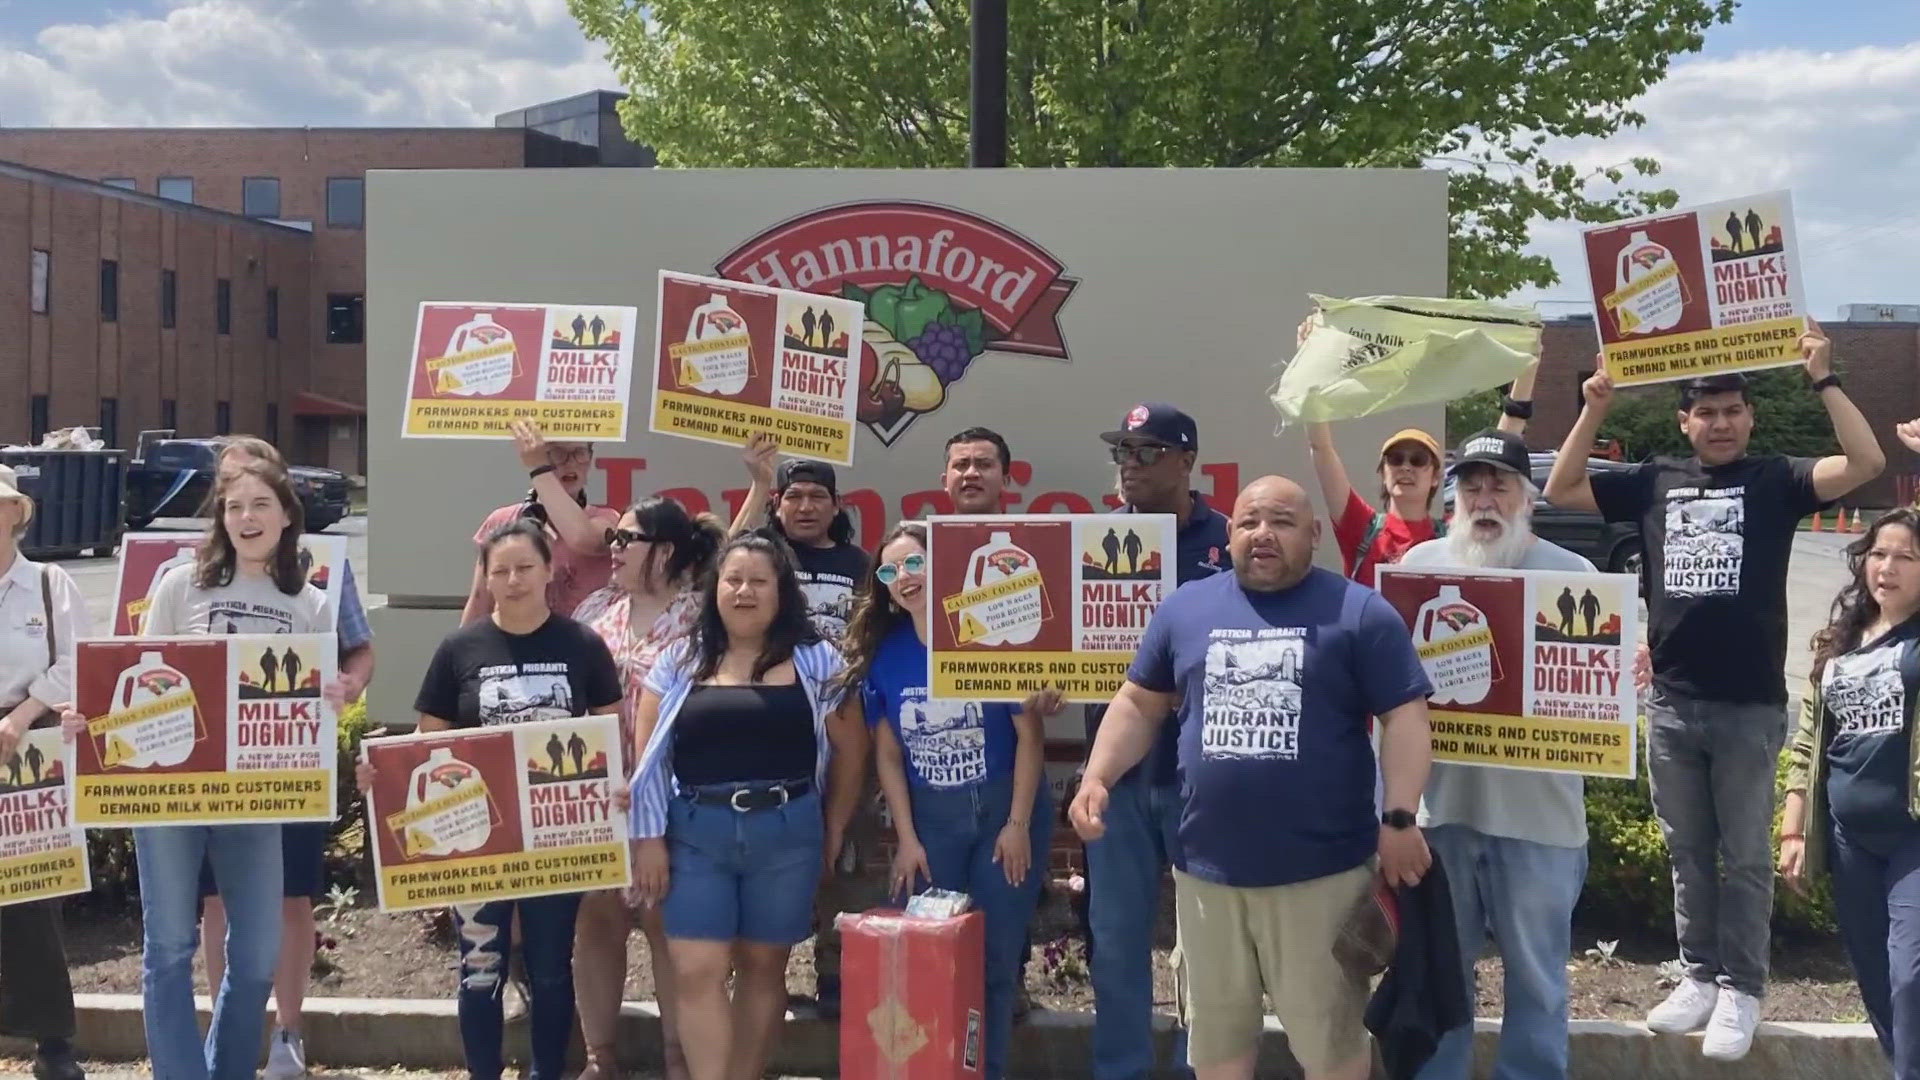 The workers are partnering with the nonprofit Migrant Justice to fight for better work conditions and petition Hannaford to adopt the "Milk with Dignity" program.